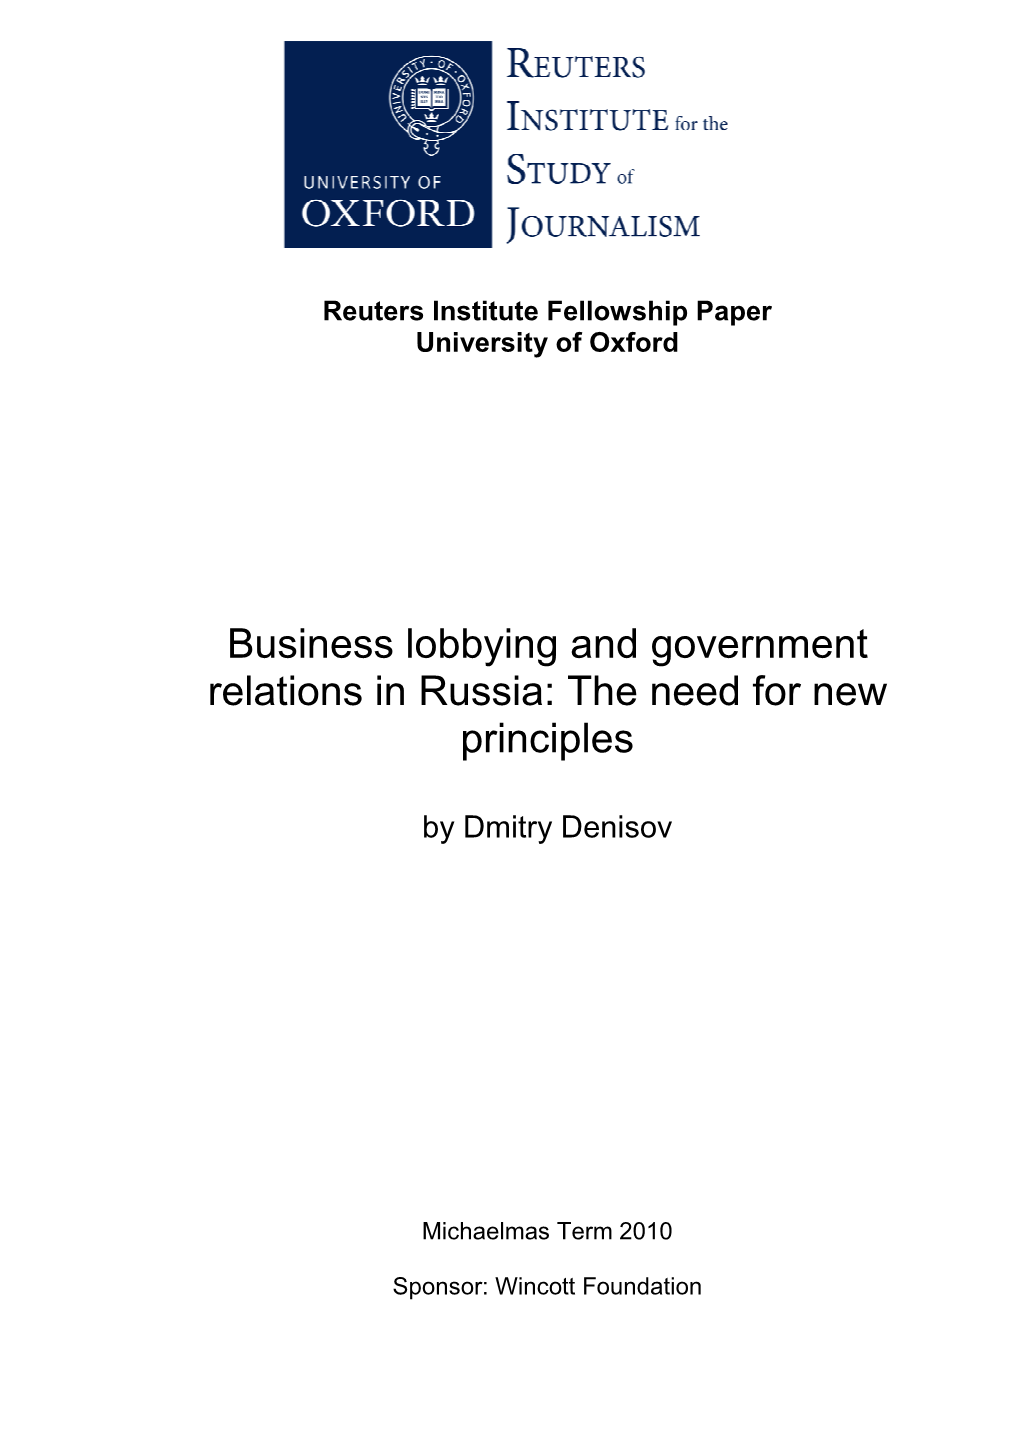 Business Lobbying and Government Relations in Russia: the Need for New Principles